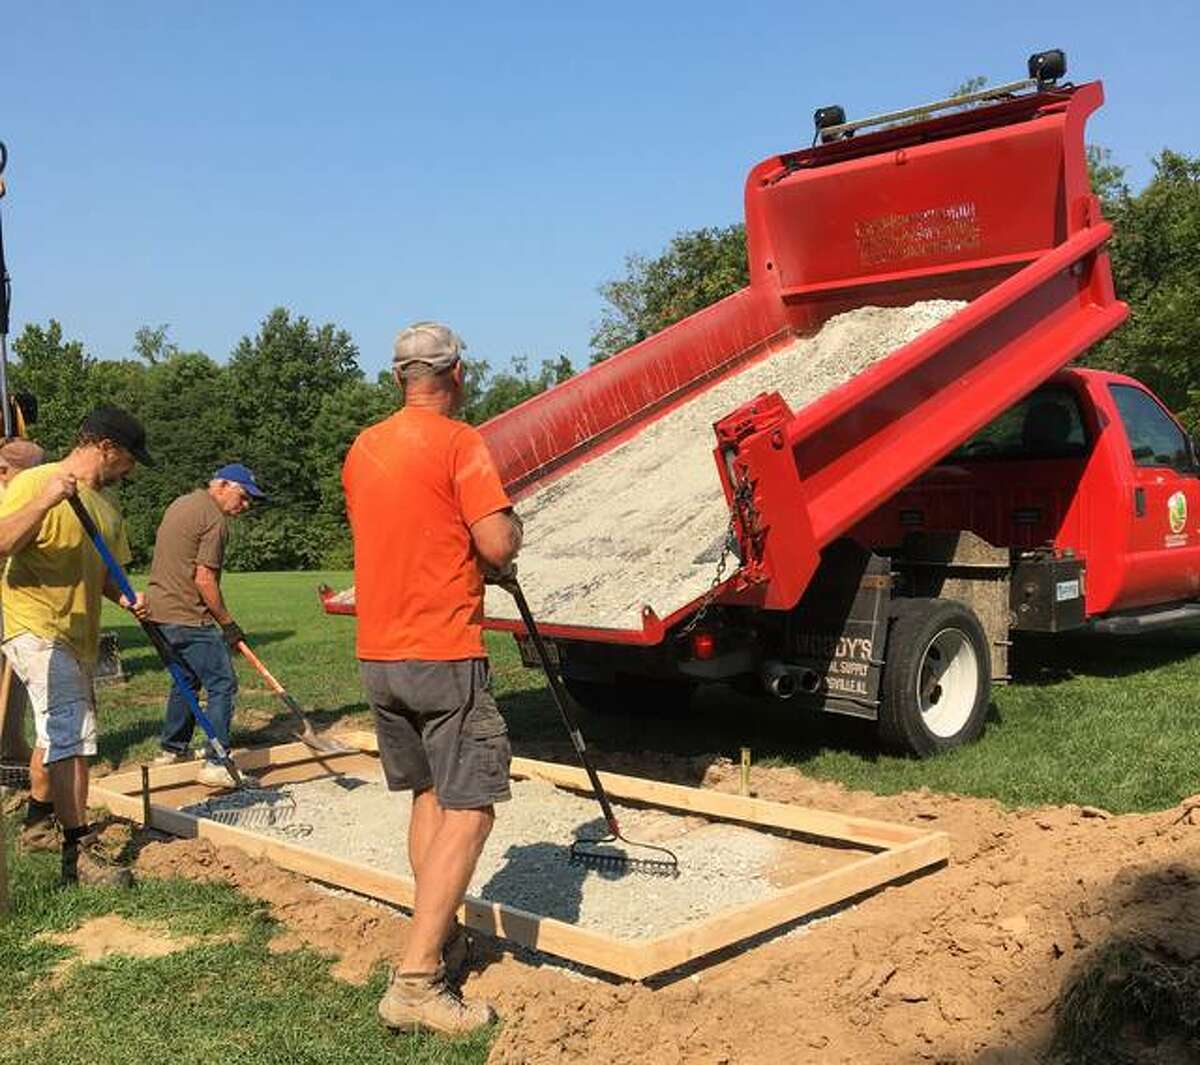 Alton-Godrey Rotary Club members Dennis Wilson, Jim White and Tracy Shaffer prepare a disc golf tee box at La Vista Park in Godfrey. Work will continue on the 18-hole course into September.